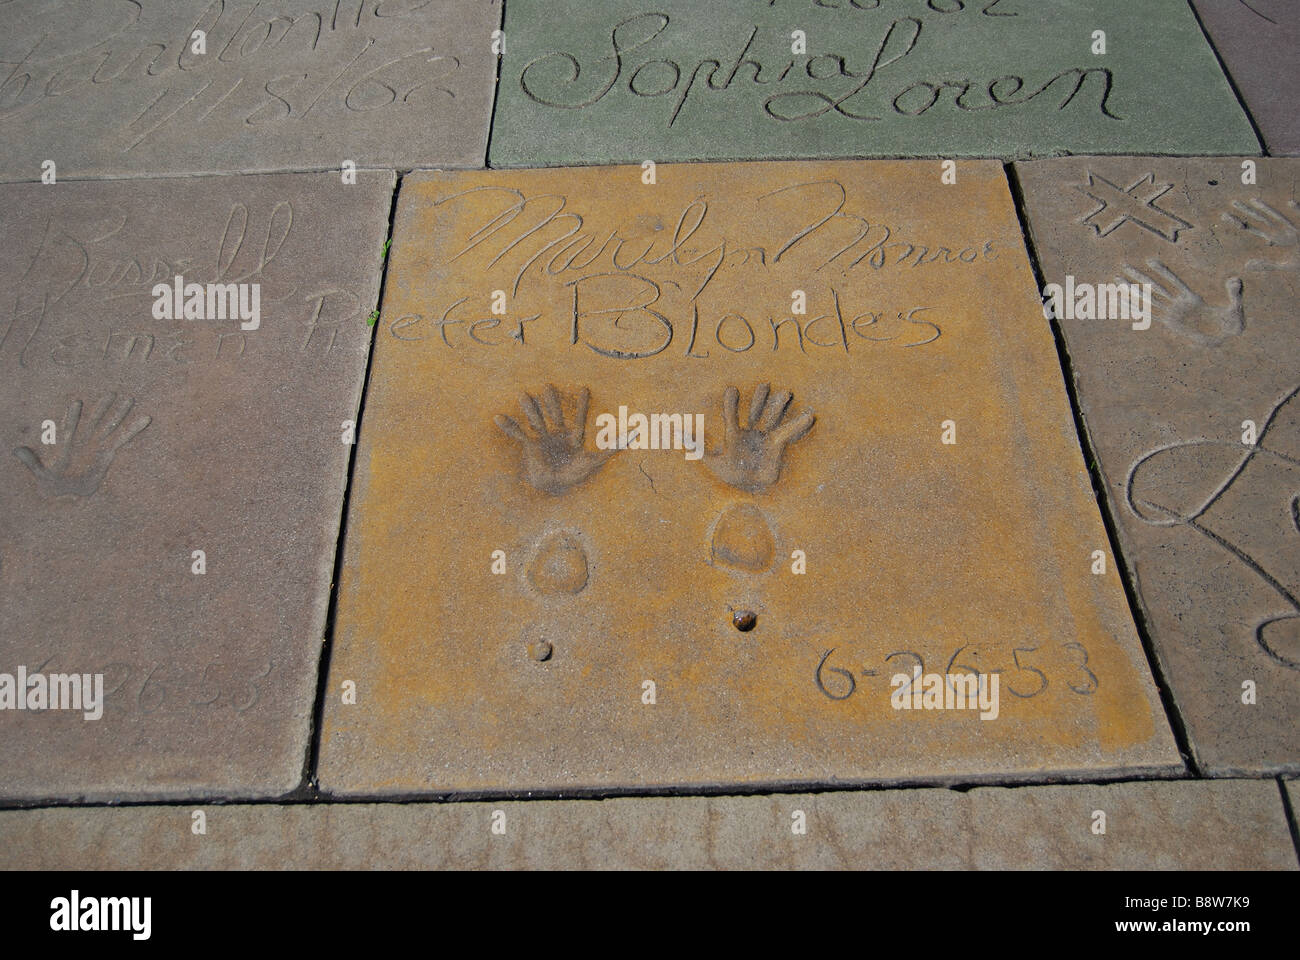 Marilyn Monroe's handprints on forecourt of TCL Grauman's Chinese Theatre, Hollywood Boulevard, Los Angeles, California, United States of America Stock Photo